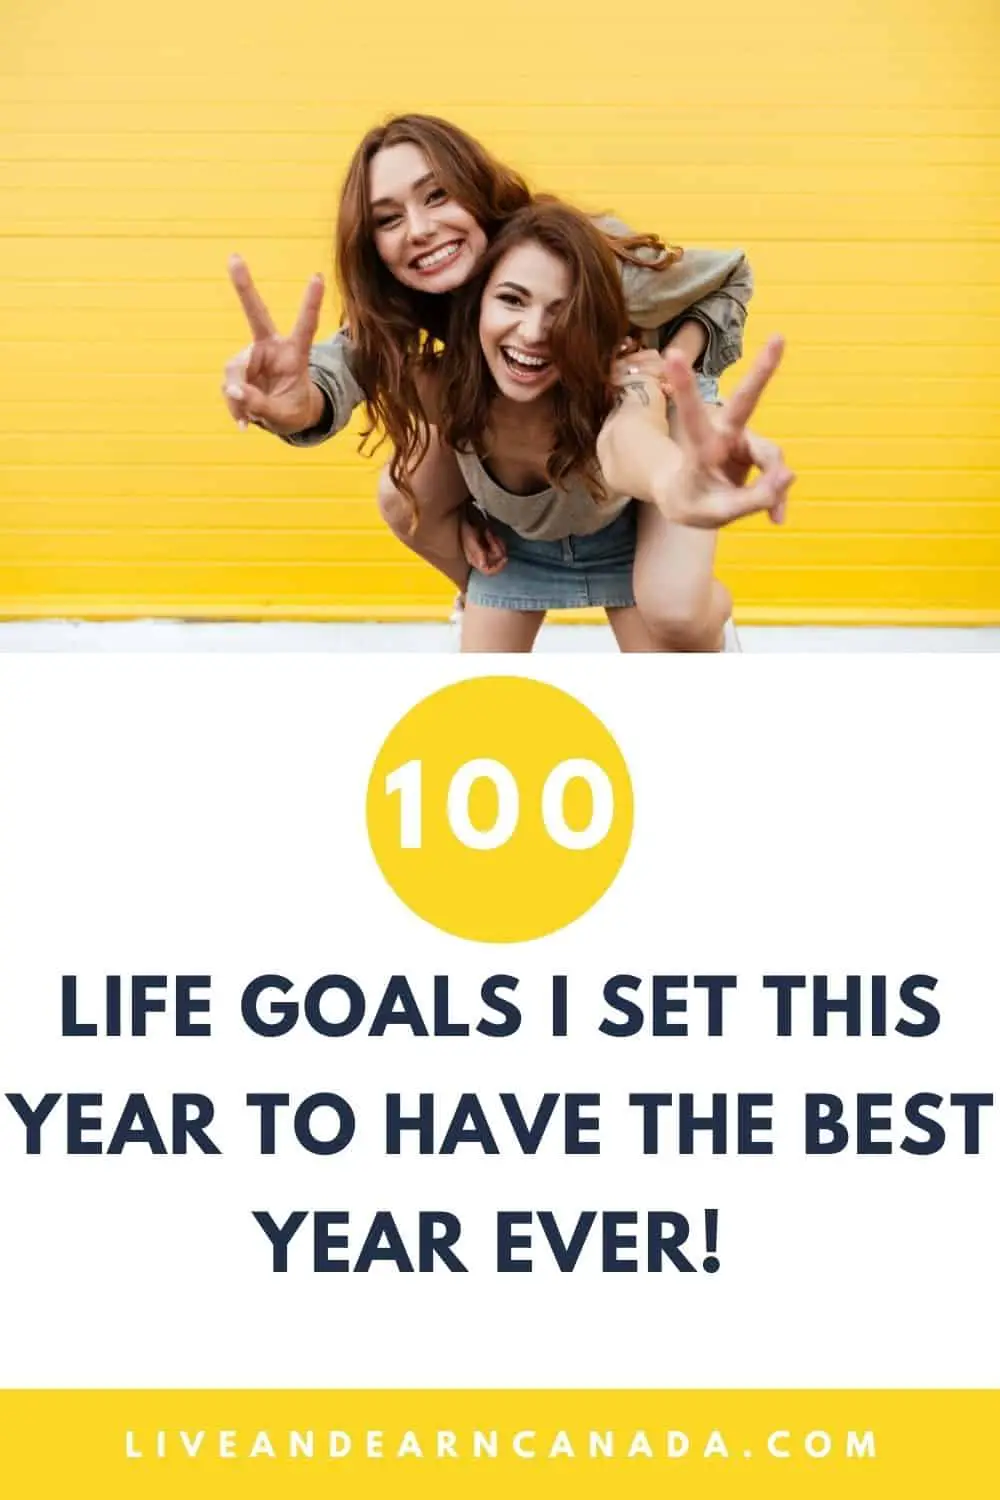 100 Life goals to set in 2021! Goal Setting Ideas - A List Of 100 Goals You Can Set This Year. Here is a list of 100 life goals list you can use to set your 2021 goals. Looking for ideas or inspiration for your next goal? Here's a list of 100 goals you can set for yourself in any category of life.